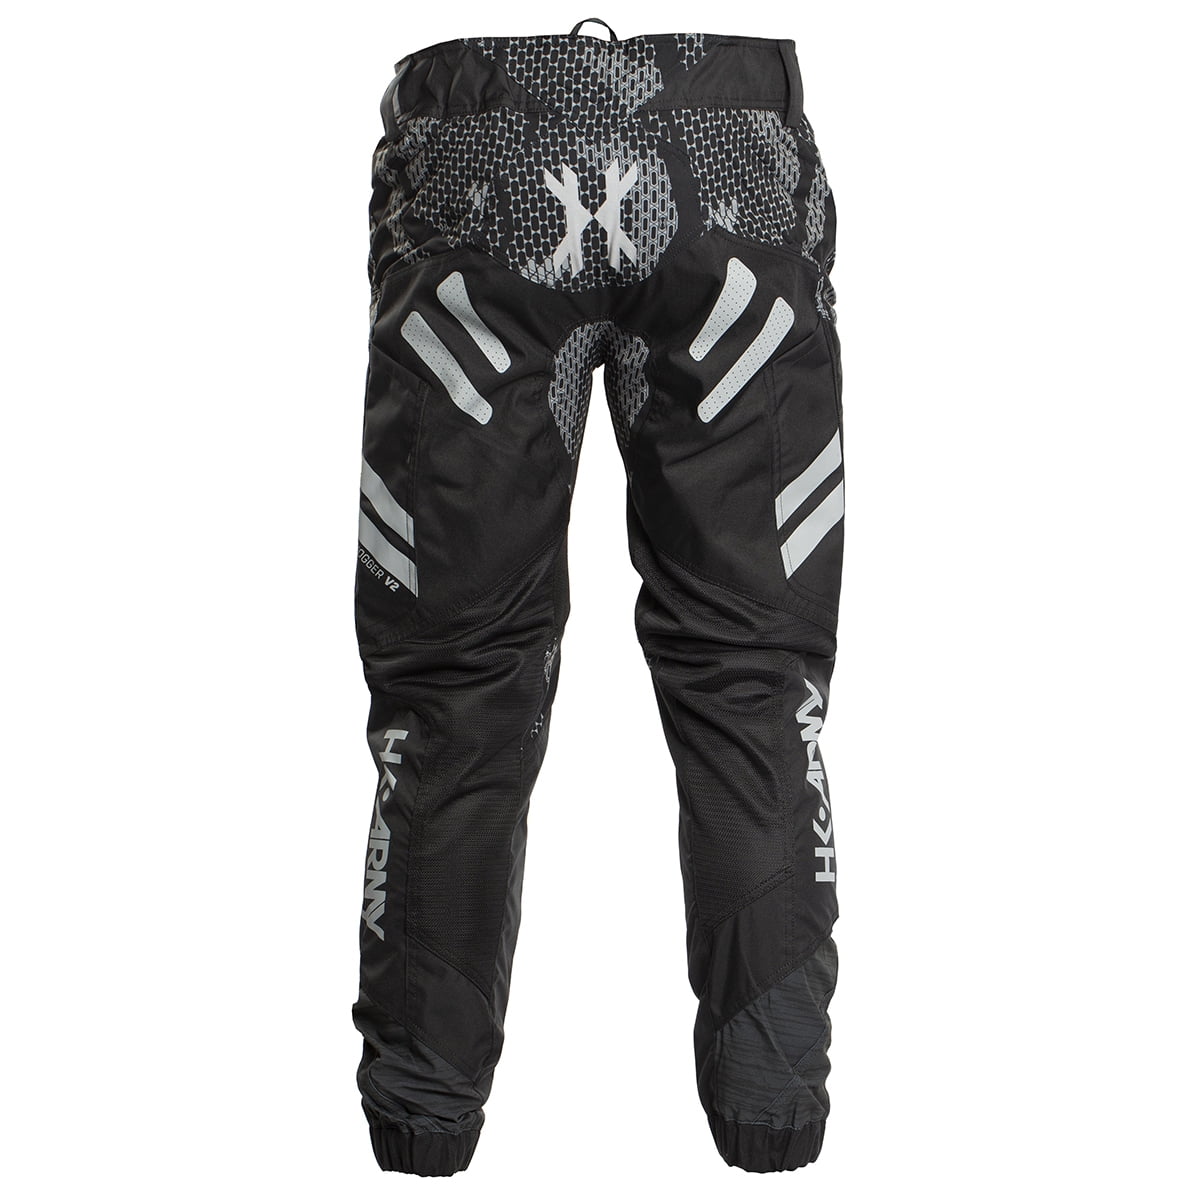 Just Released XS / Small Graphite 26-30 HK Army Freeline Jogger Fit V2 Pant 